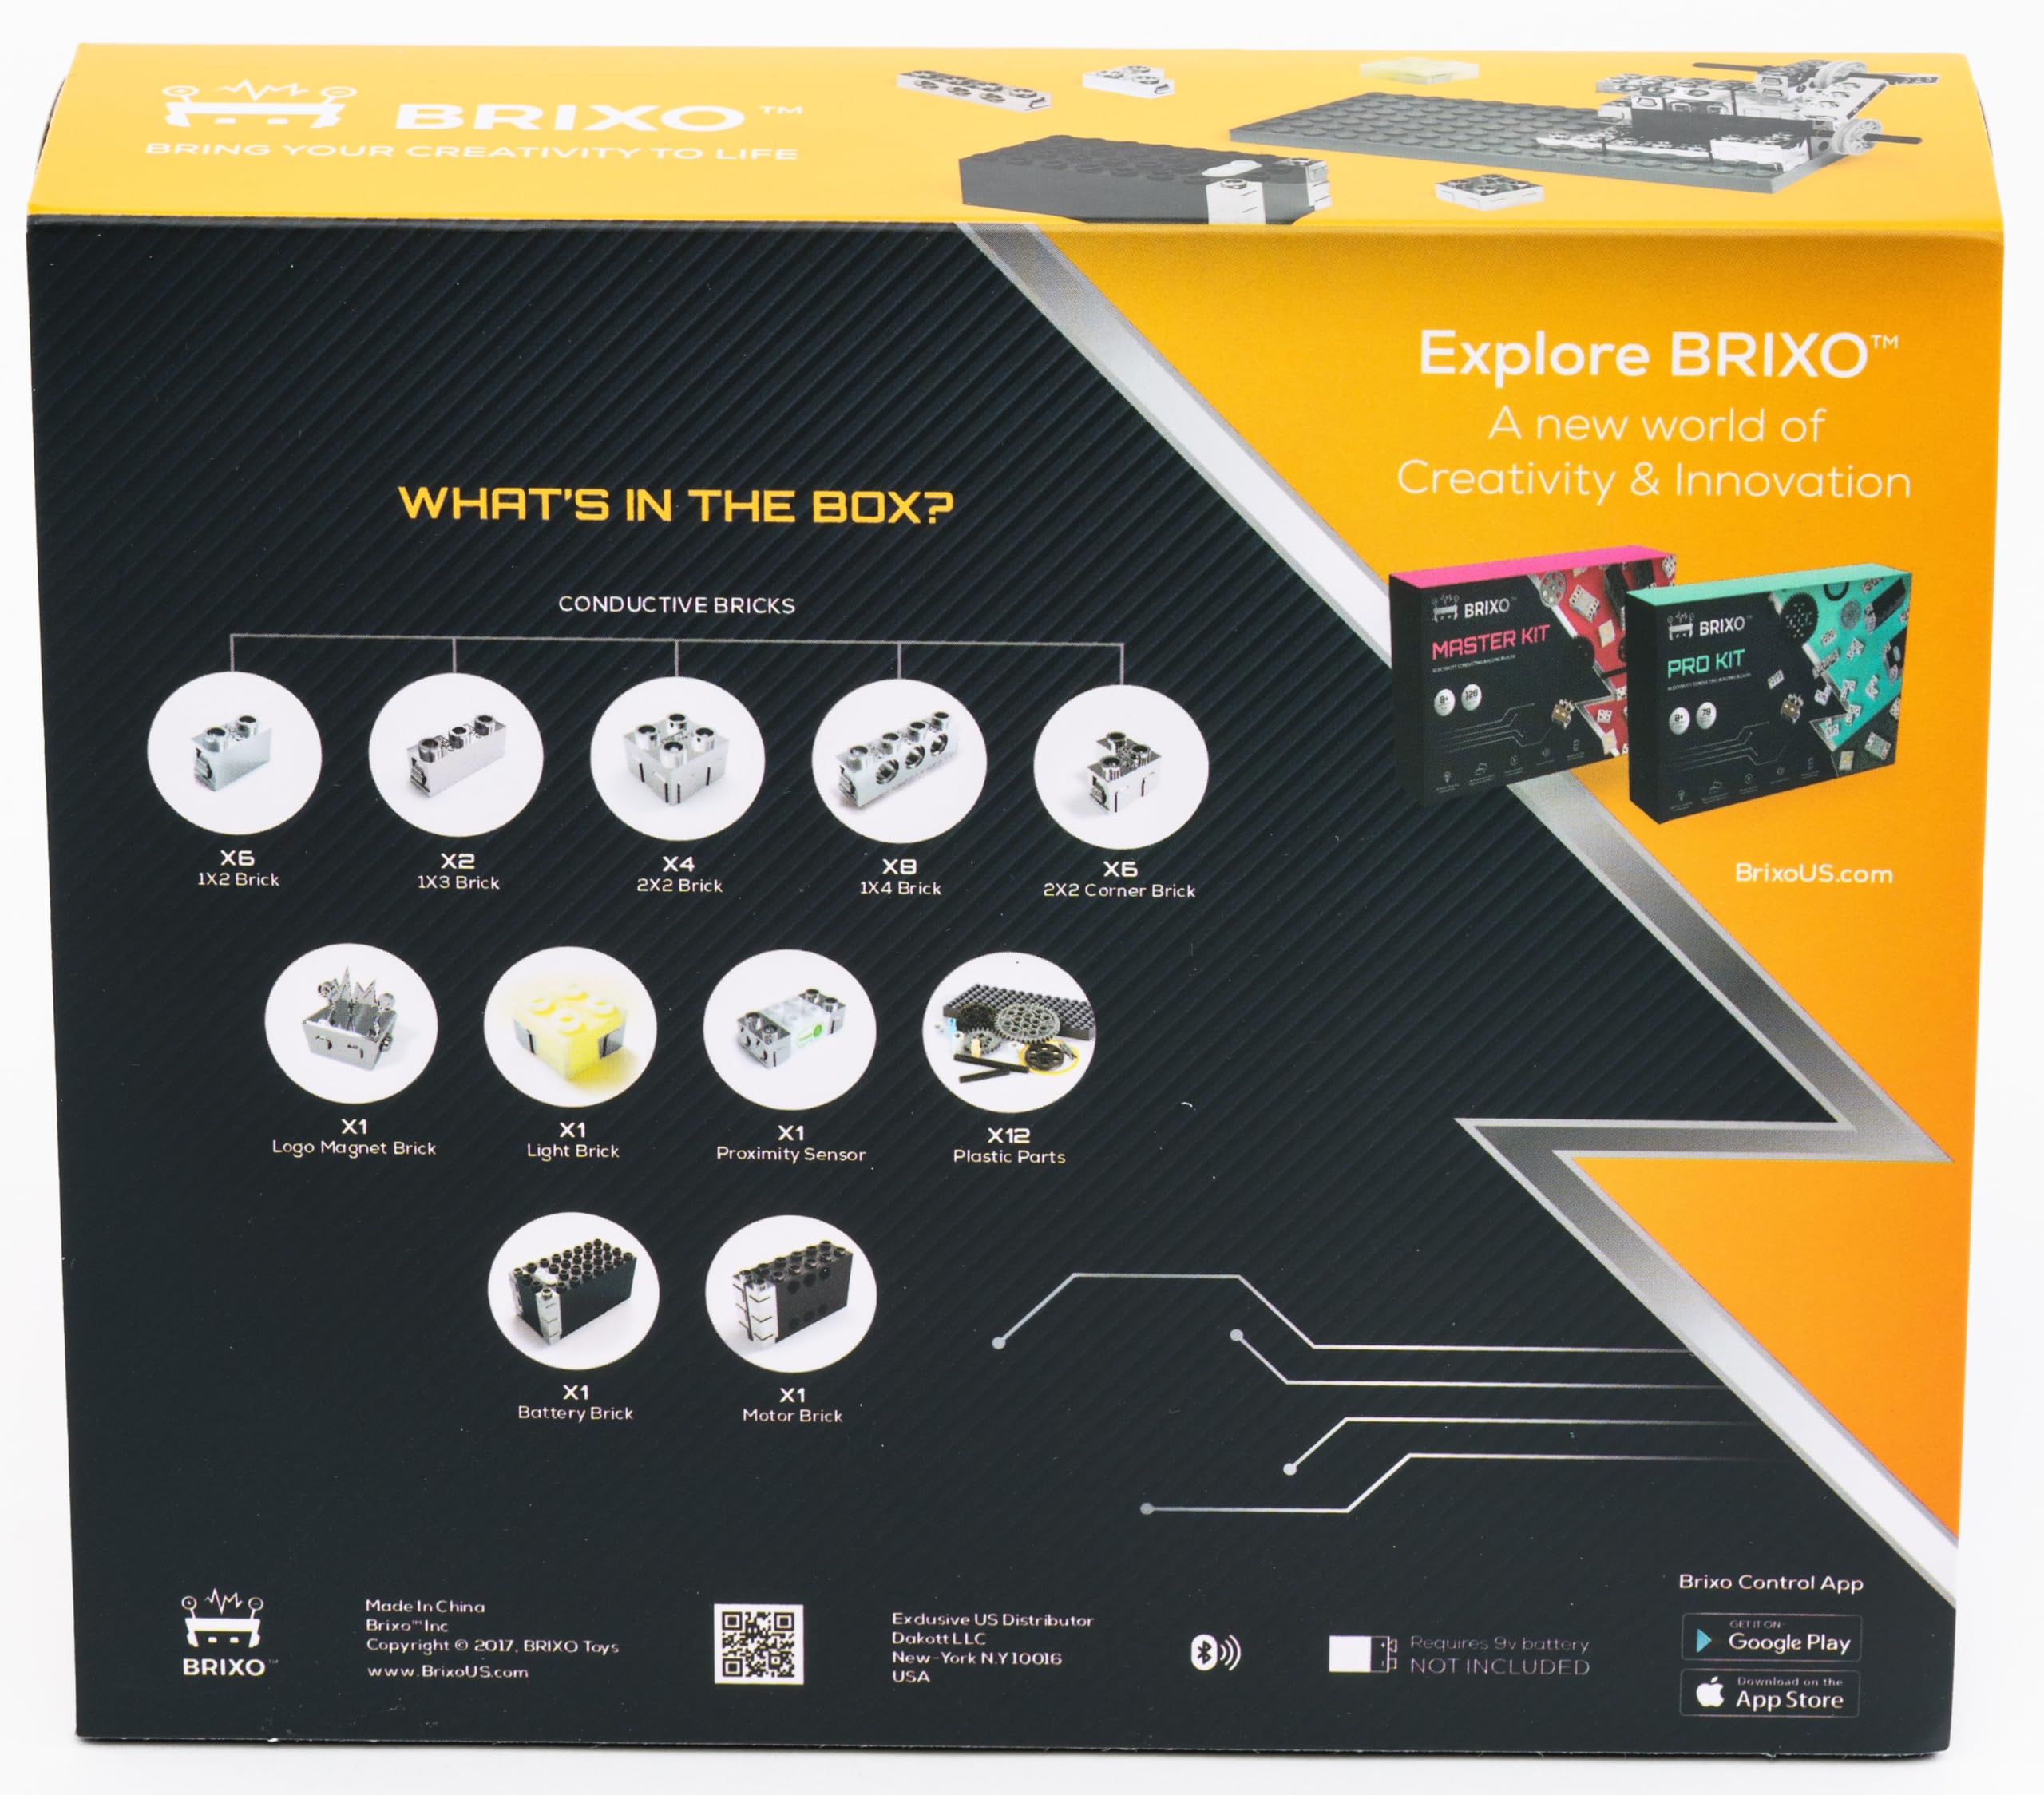 Dakott Explorer-KIT, Electricity conducting Building Blocks, Fully Compatible with All LegoBricks and Models. Meet BRIXO - A New World of Creativity and Innovation. Bring Your LegoBricks to Life.